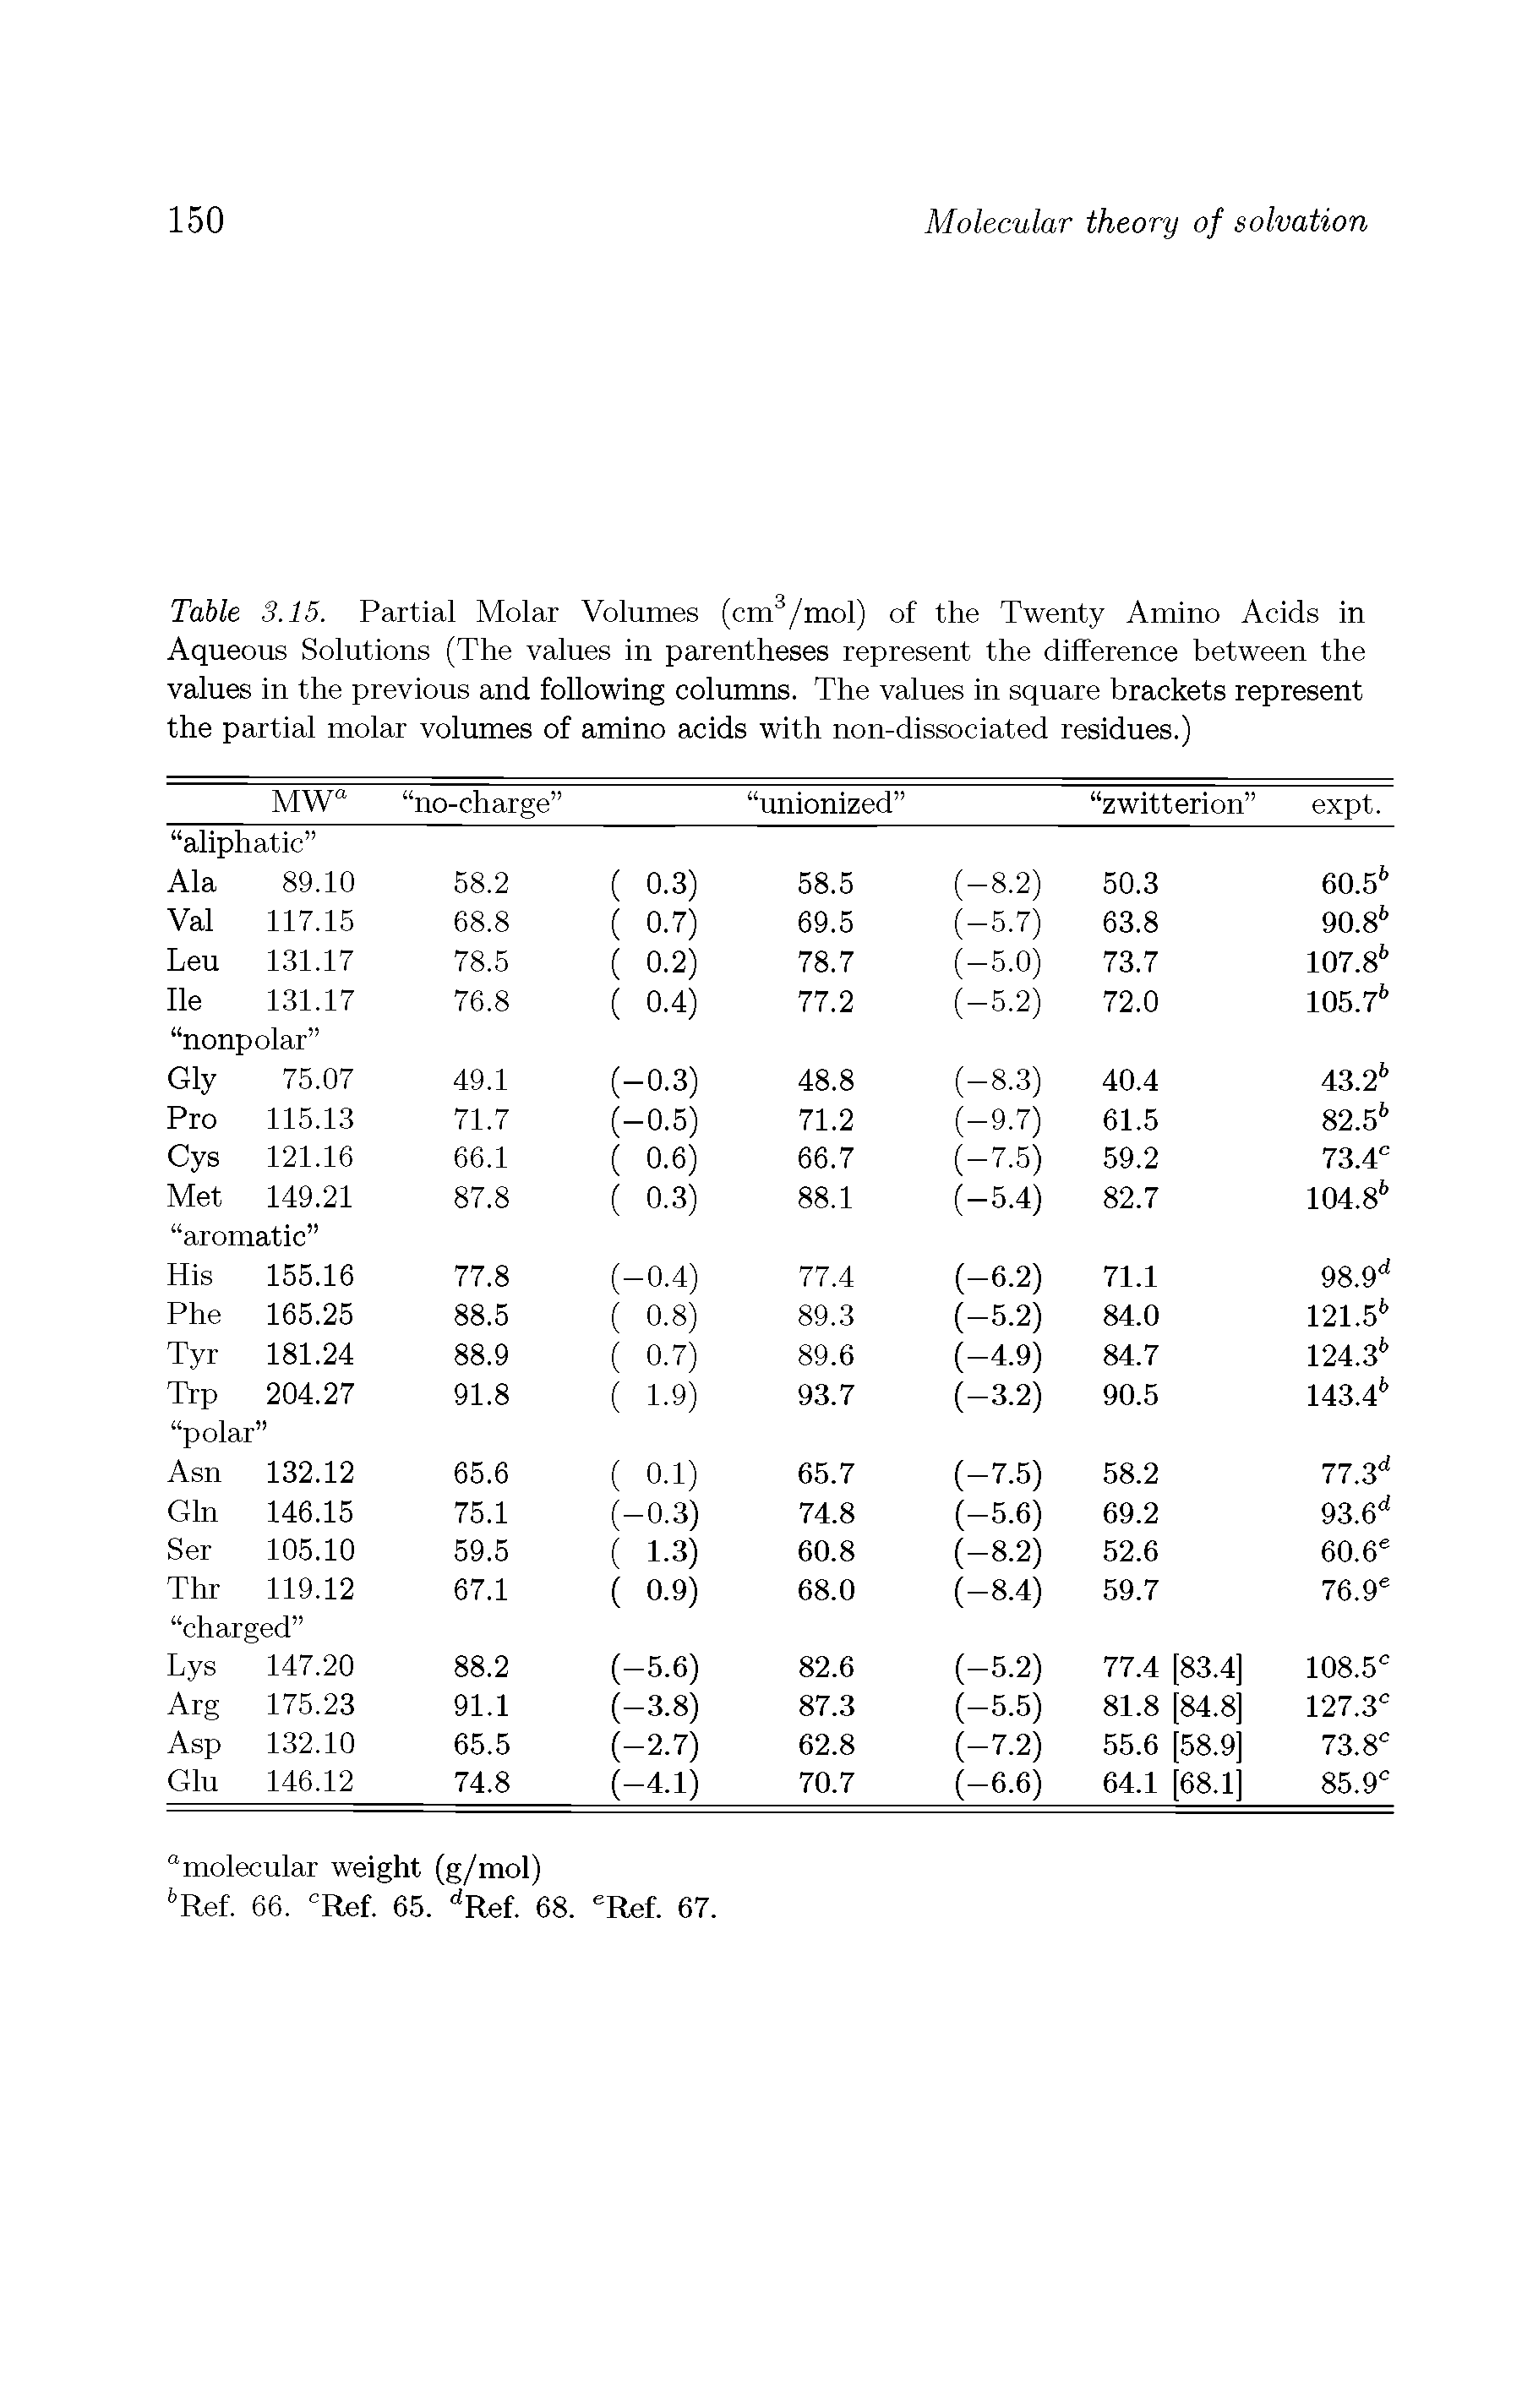 Table 3.15. Partial Molar Volumes (cm /mol) of the Twenty Amino Acids in Aqueous Solutions (The values in parentheses represent the difference between the values in the previous and following columns. The values in square brackets represent the partial molar volumes of amino acids with non-dissociated residues.)...